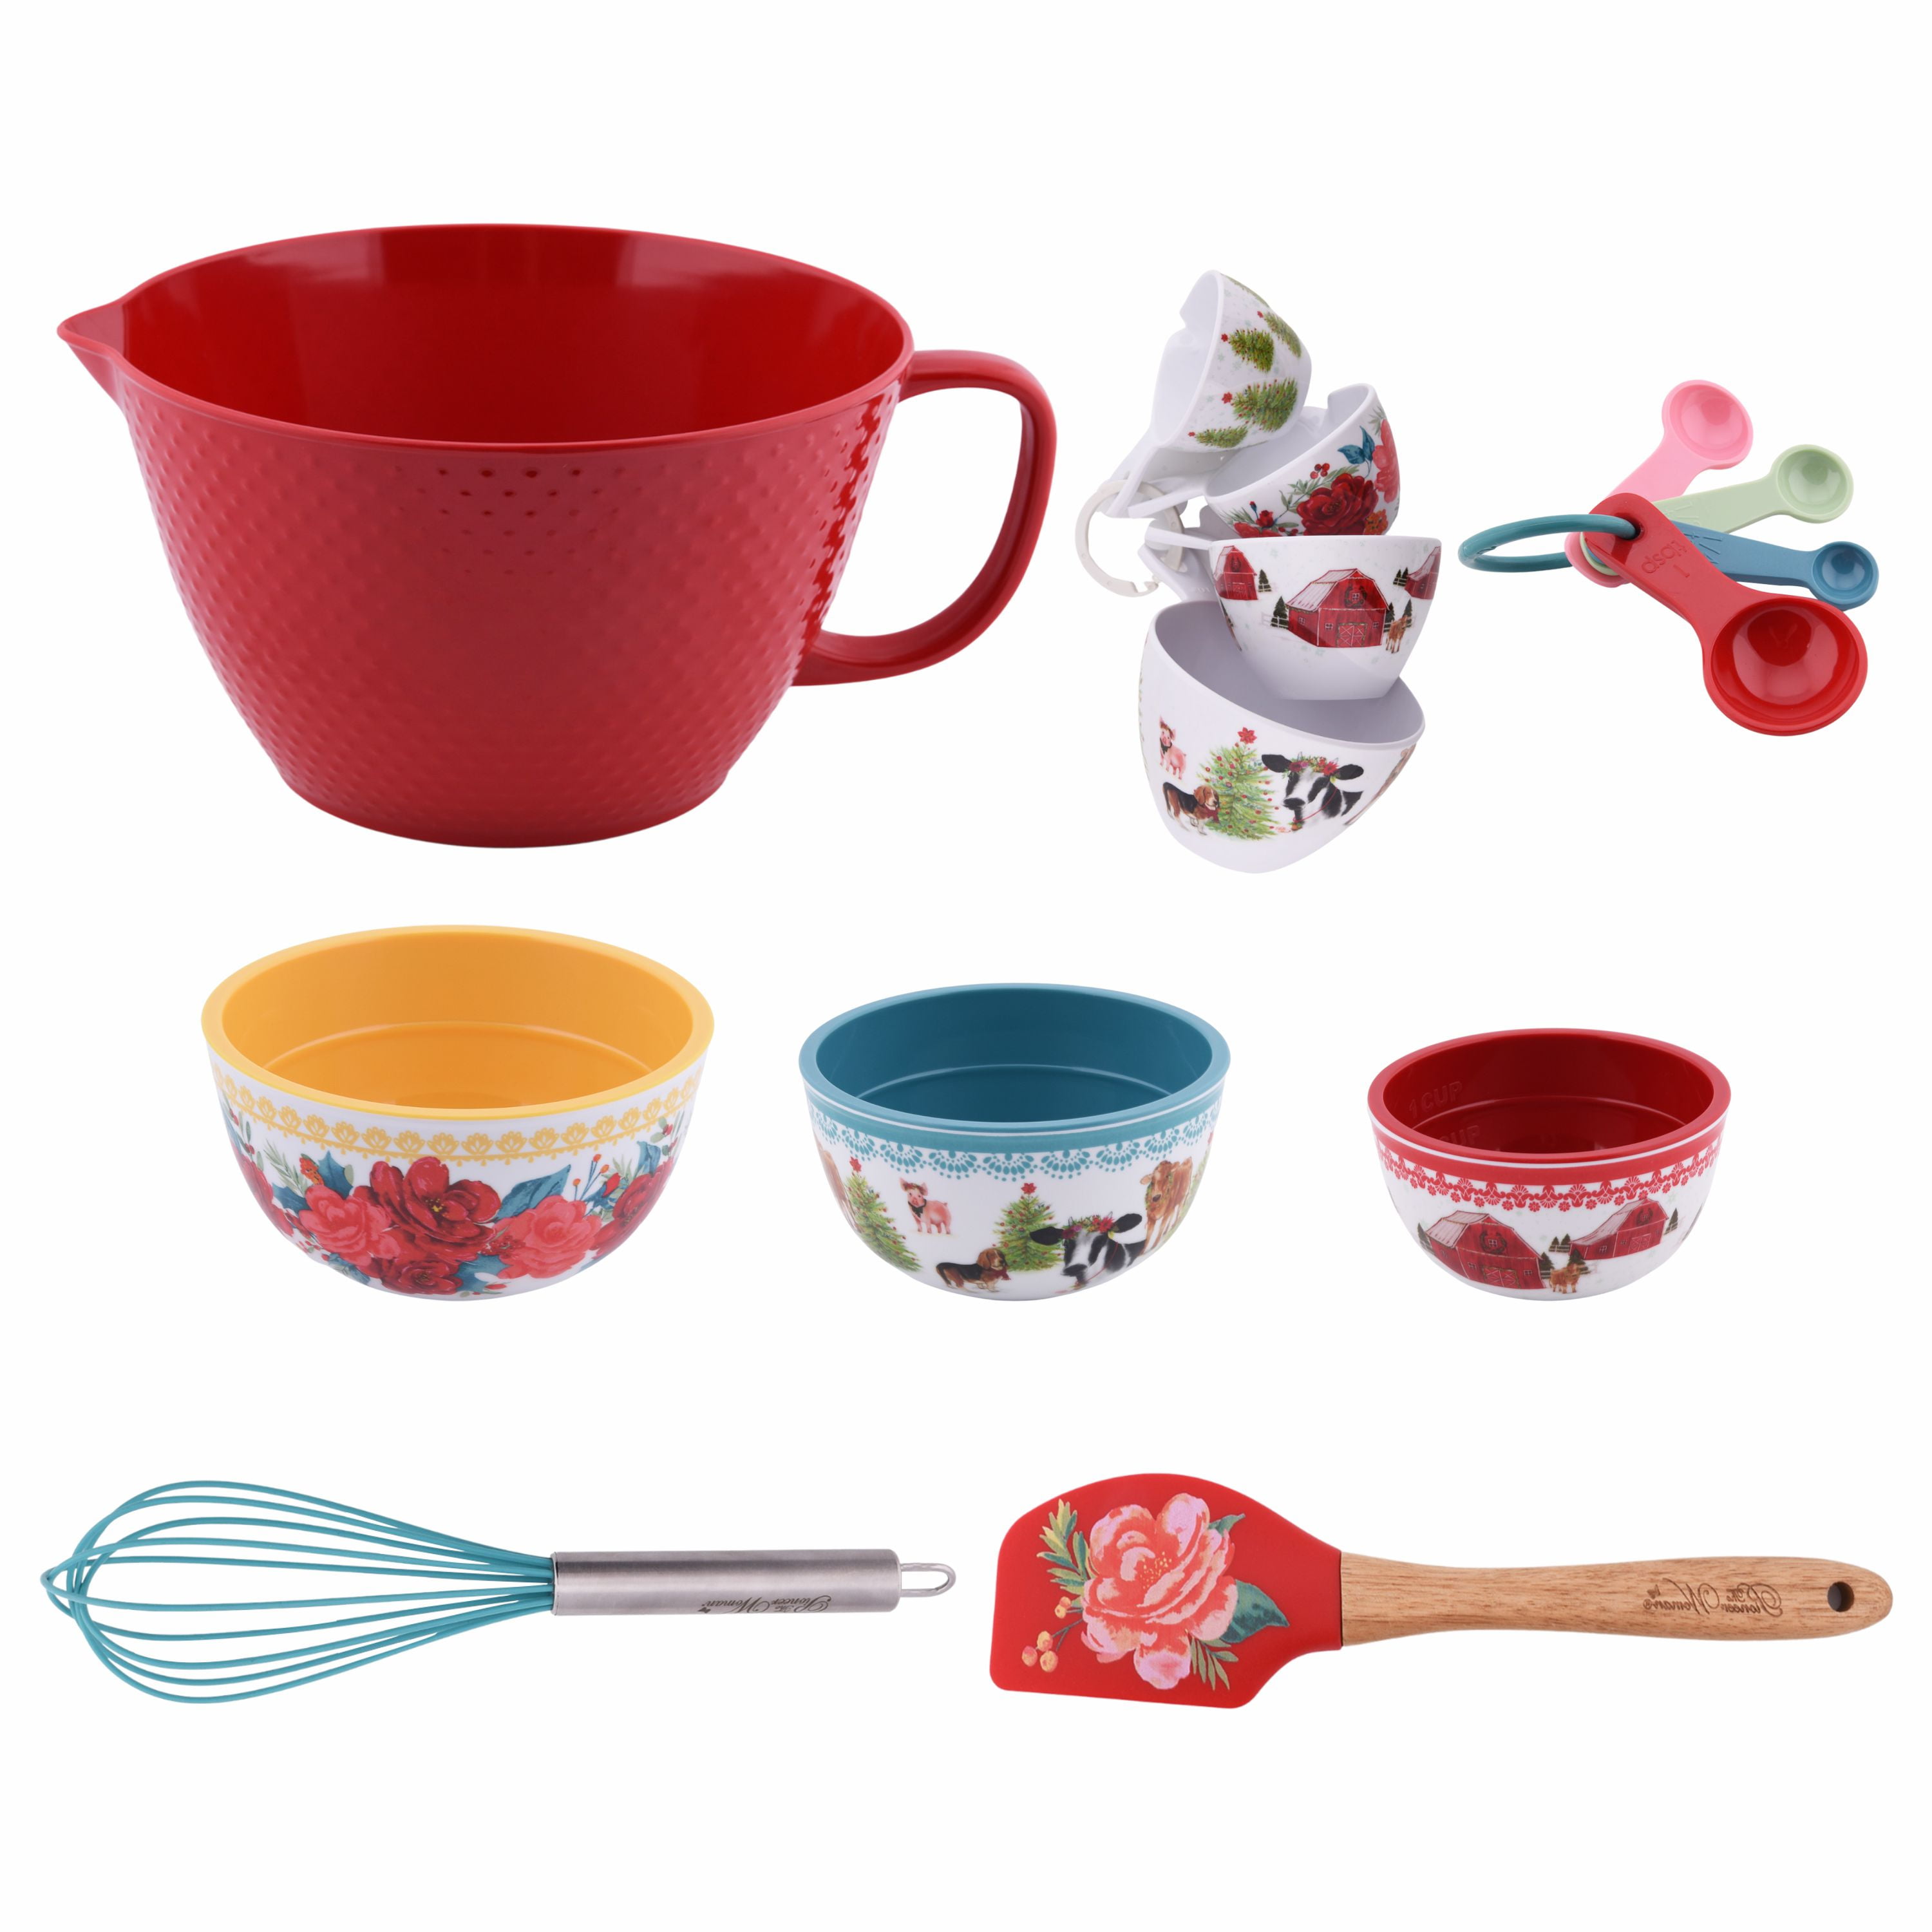 The Pioneer Woman 14-Piece Baking Set Only $18.44 on Walmart.com